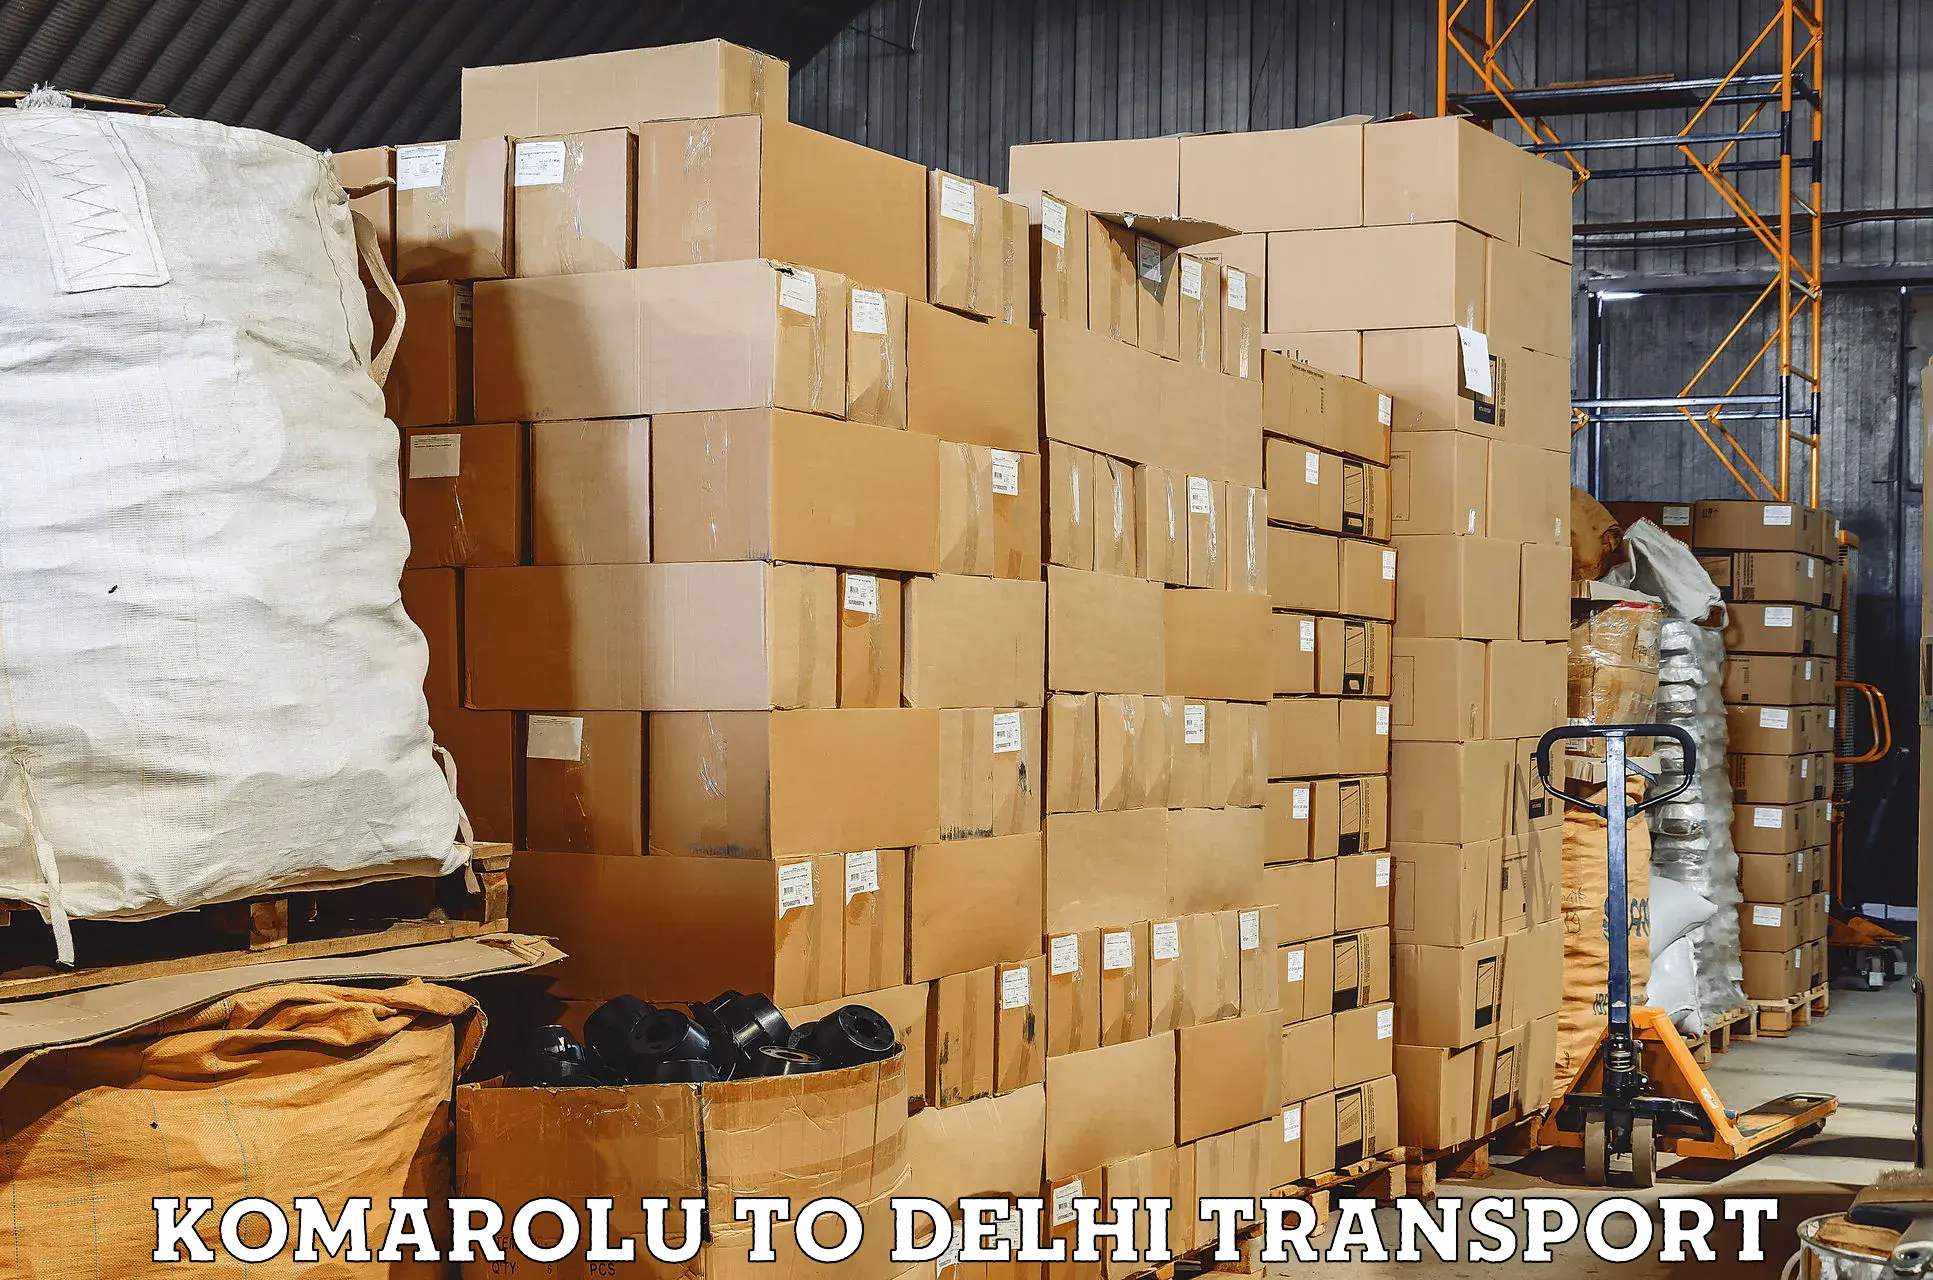 Transport bike from one state to another Komarolu to East Delhi